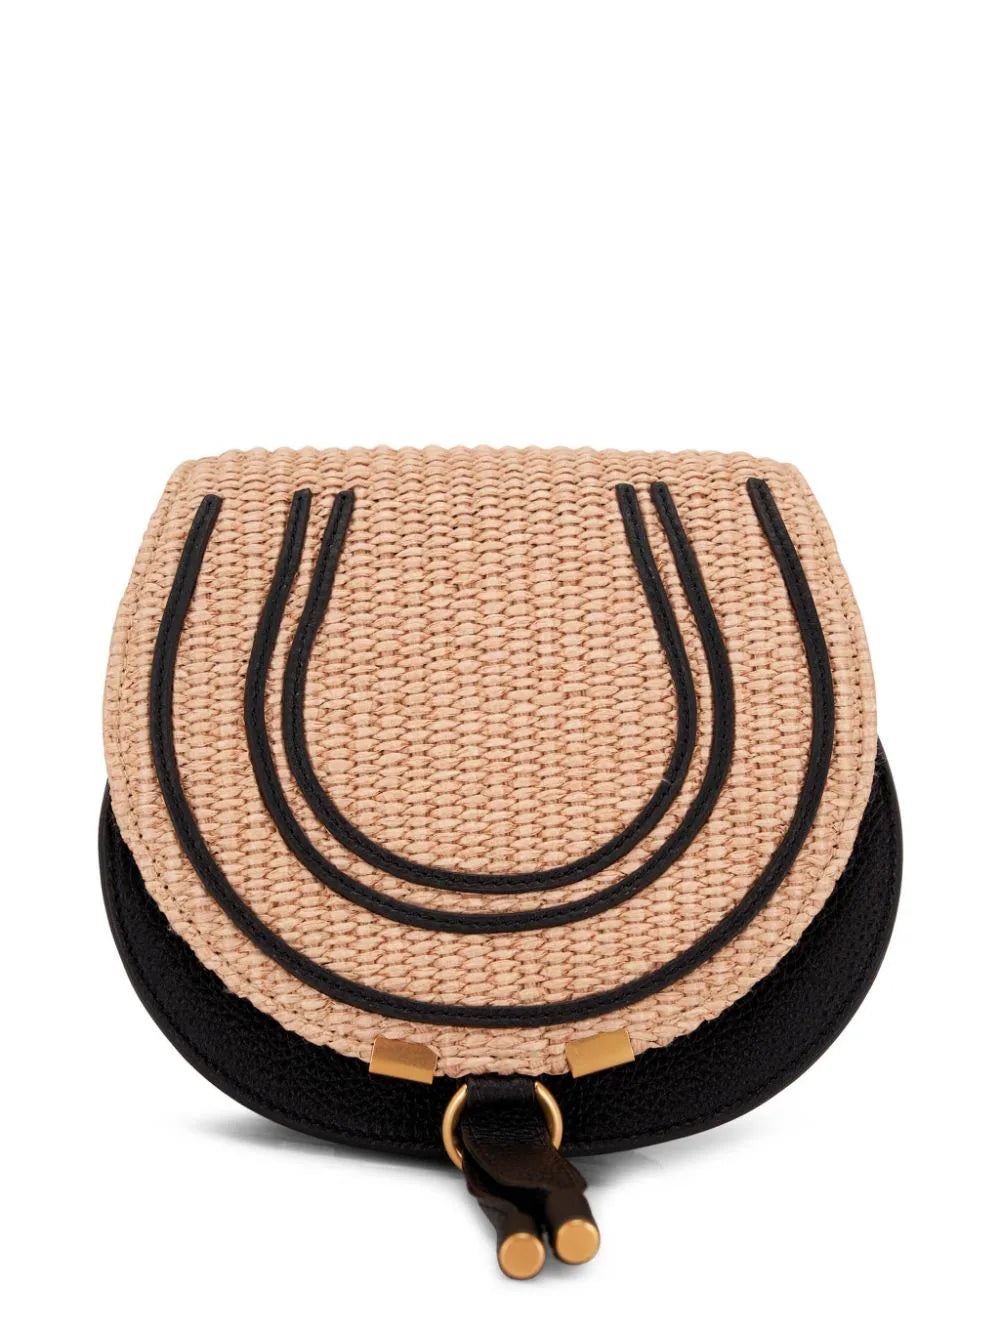 Marcie Small Saddle Bag in Hot Sand